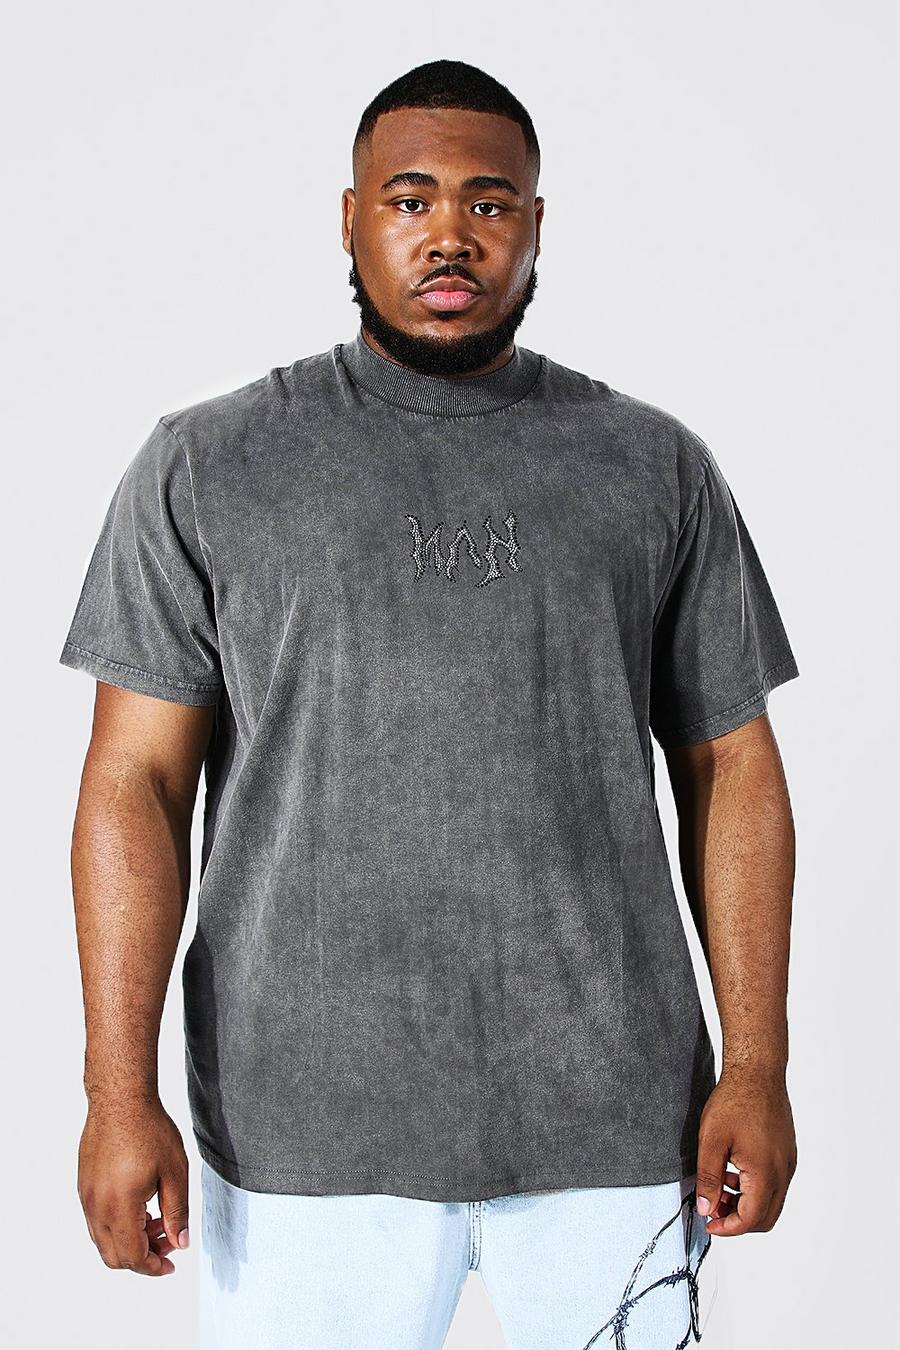 Charcoal grey Plus Size Man Rhinestone Embroidered T-shirt image number 1